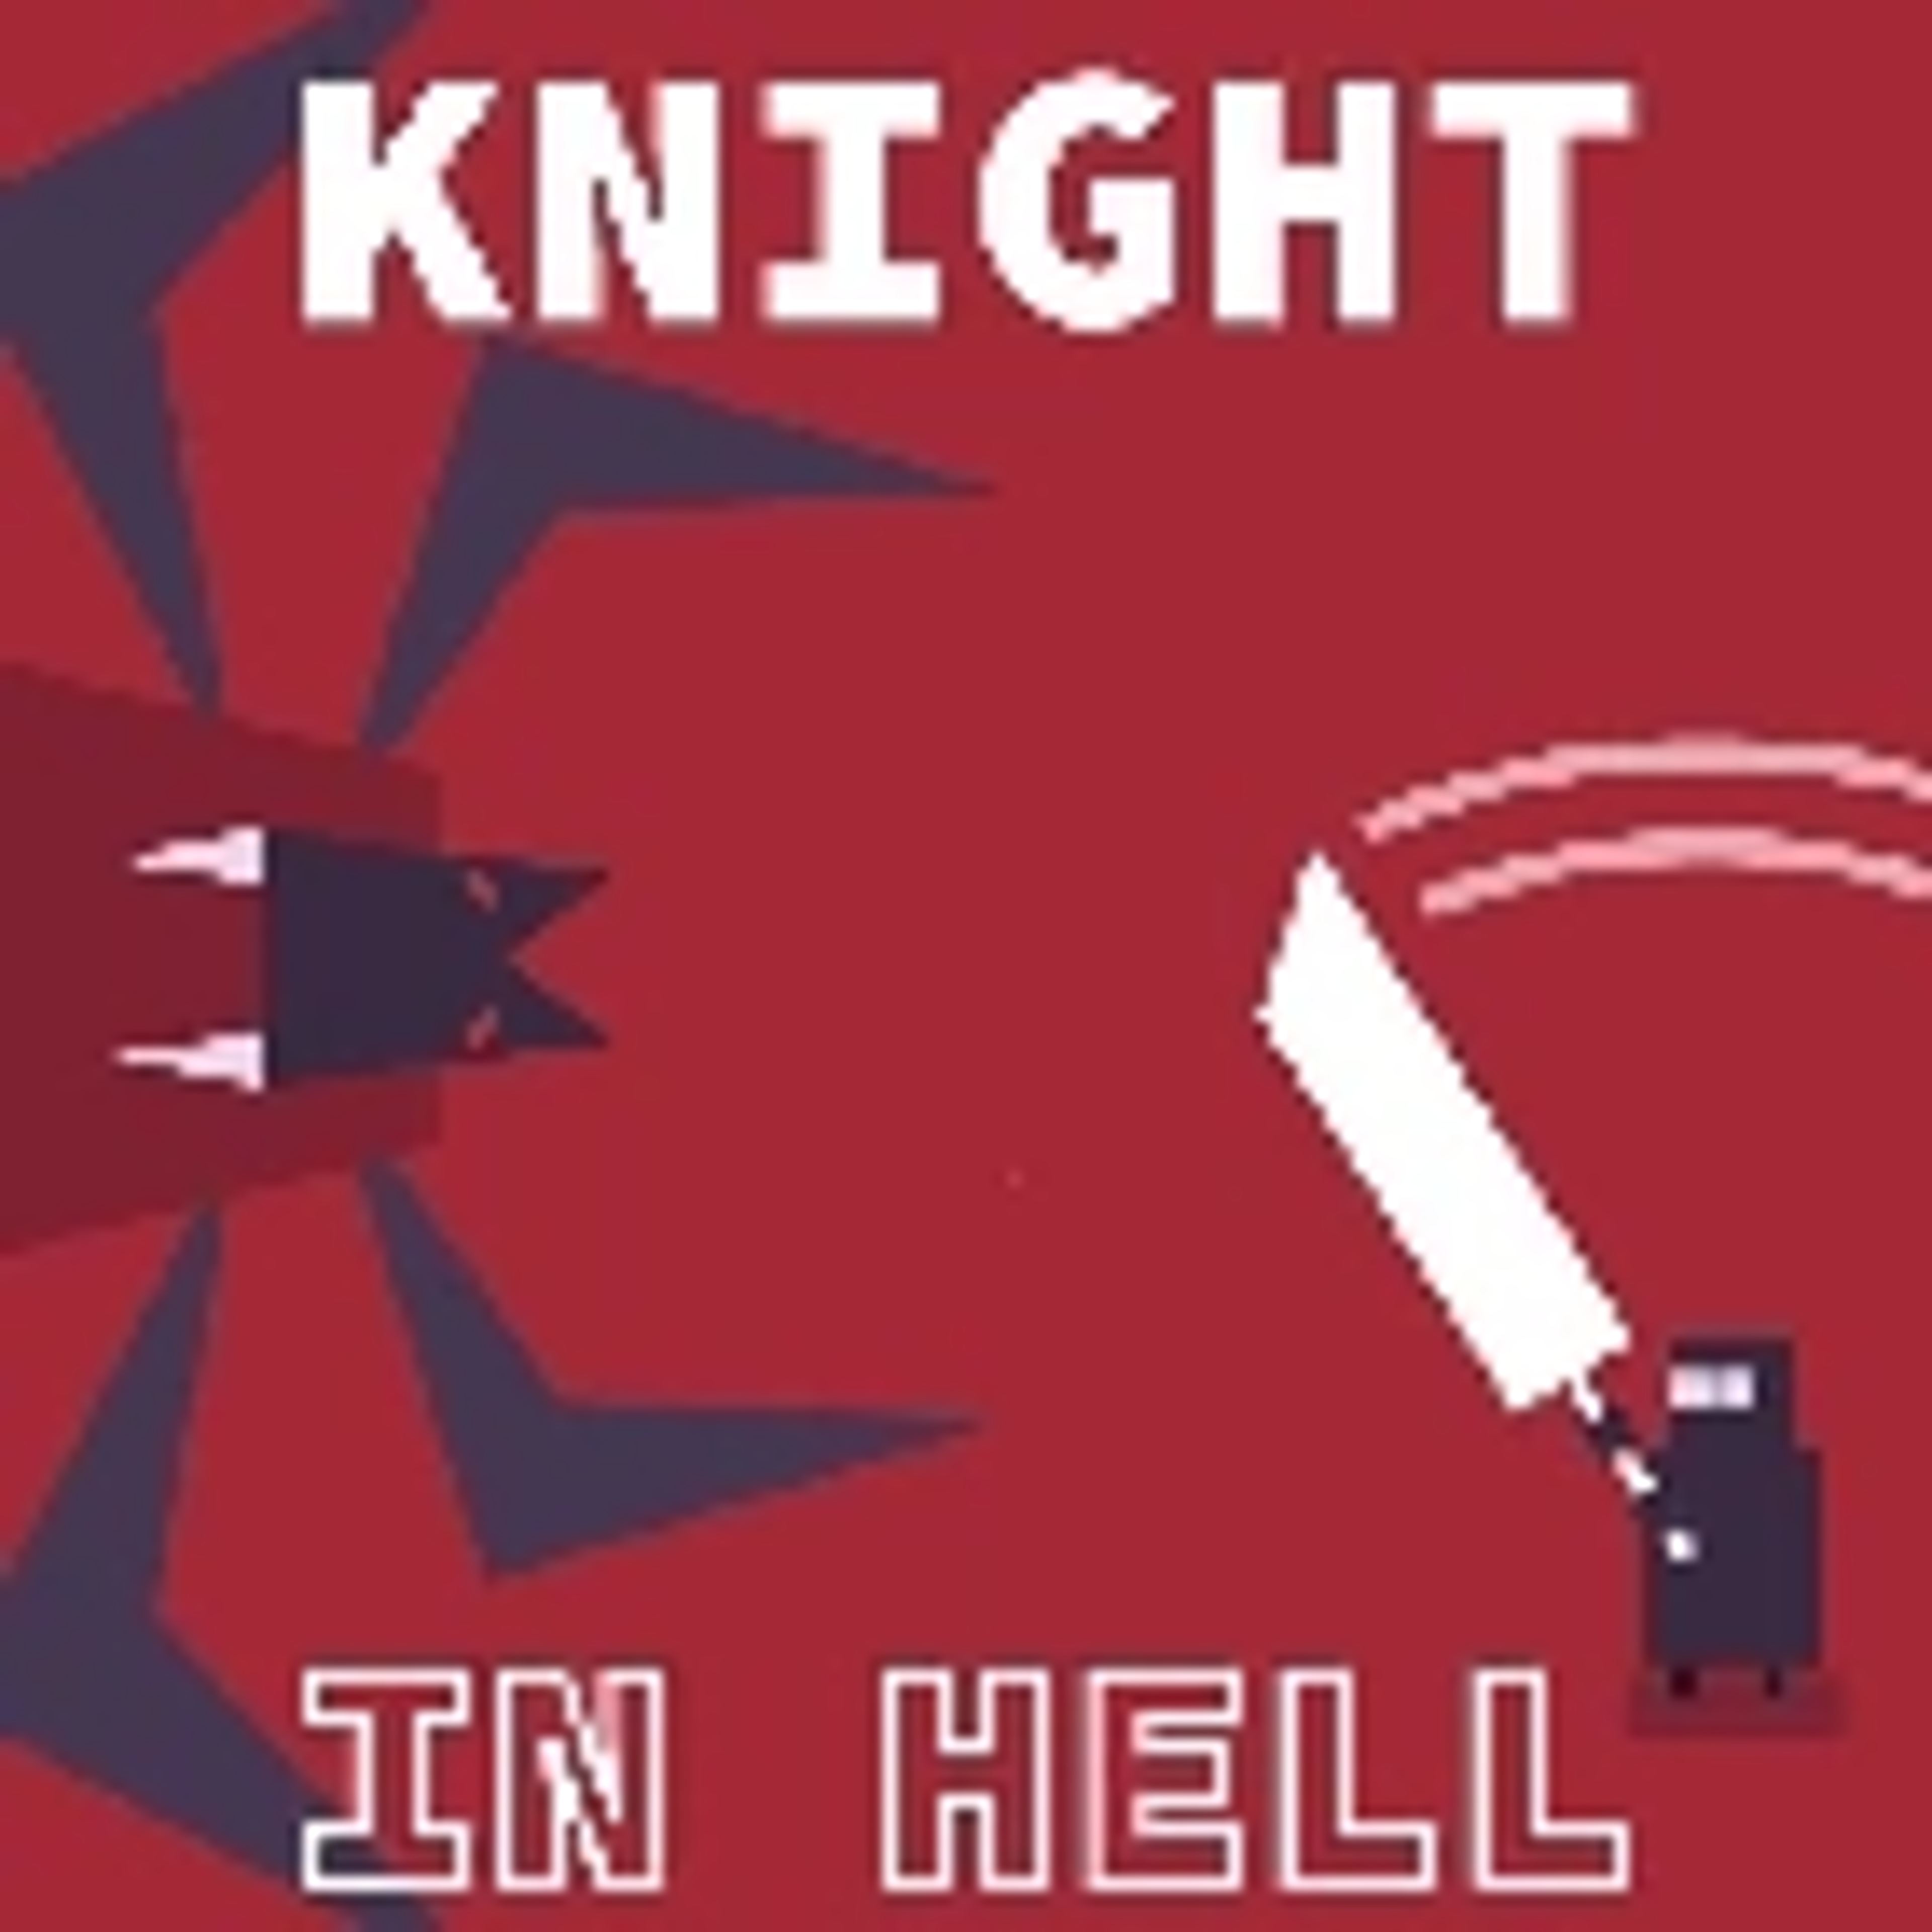 Knight in Hell